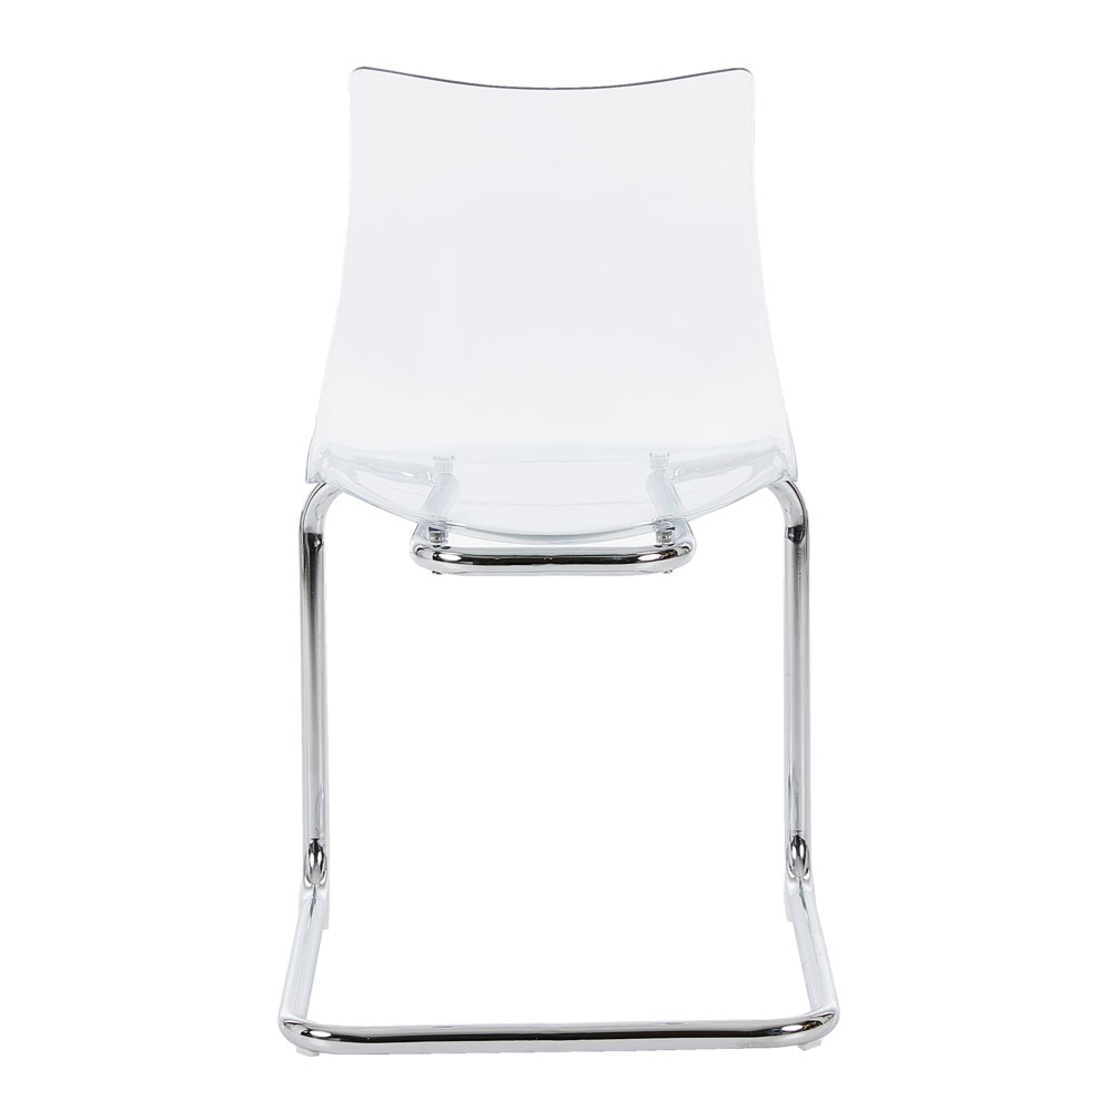 MY TRUTH CHAIR PC TRANSPARENT PRC